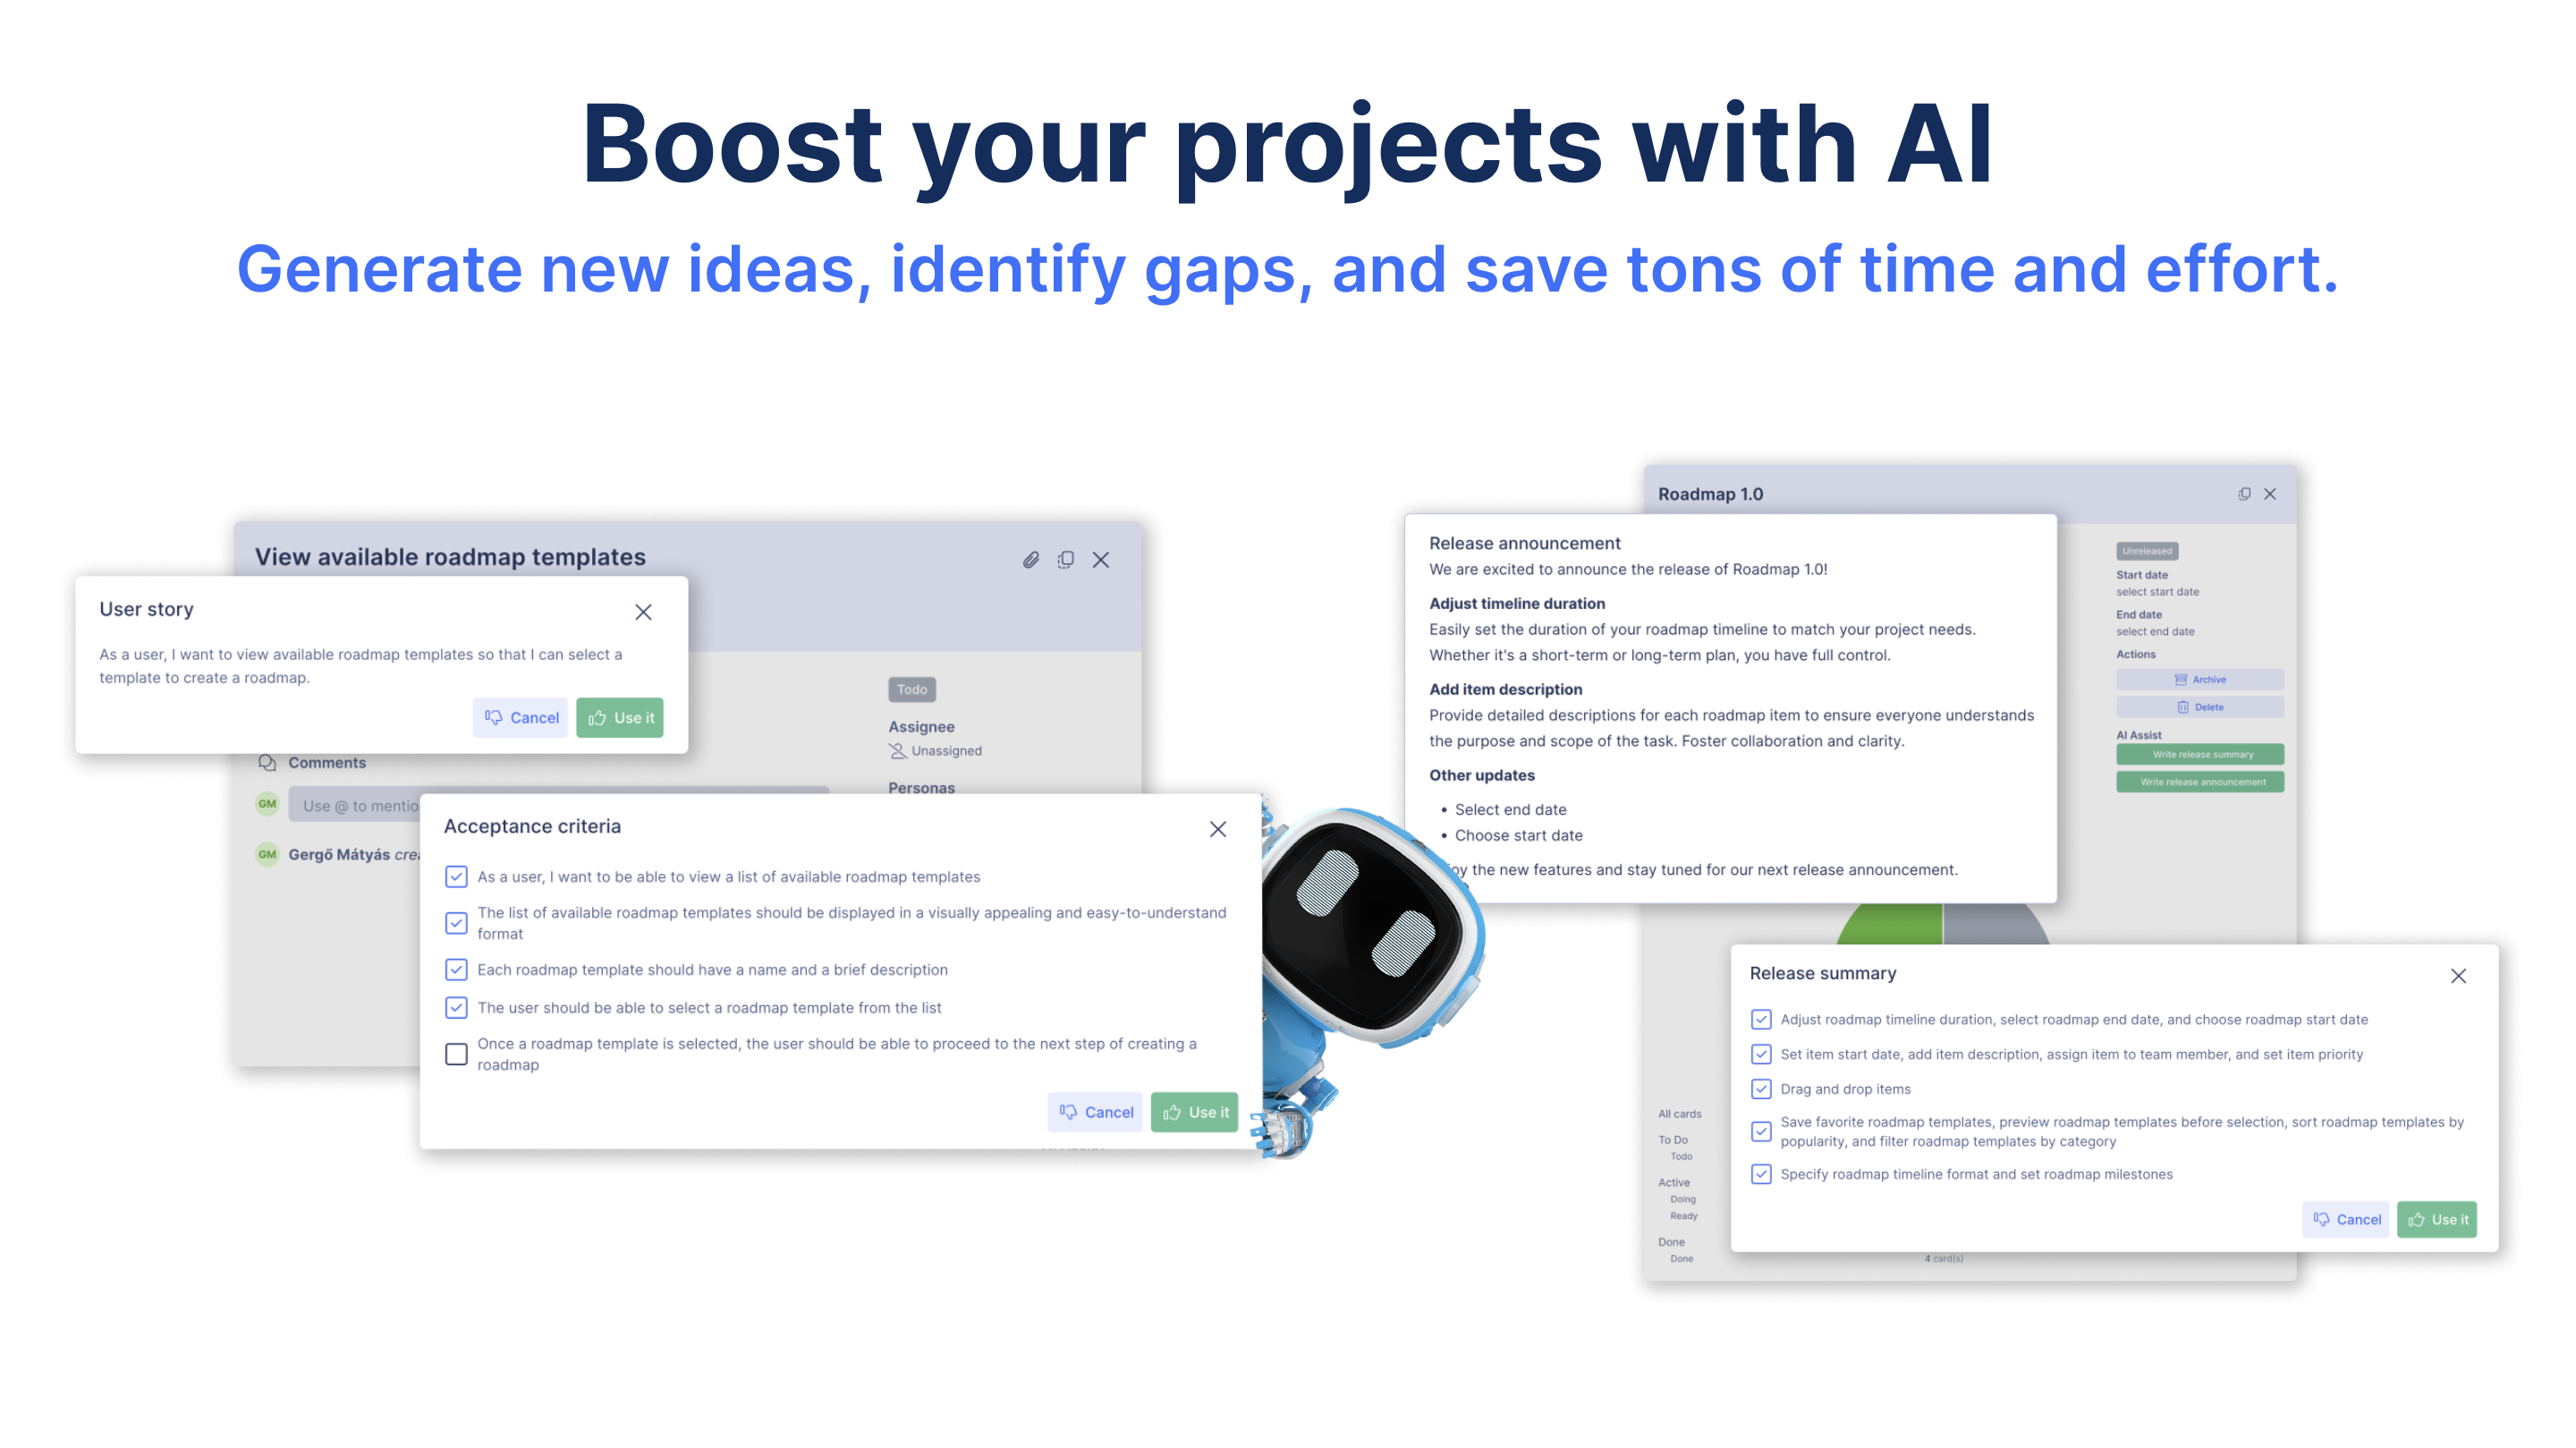 Start story mapping with AI! StoriesOnBoards’ new feature streamlines project planning by generating user stories, acceptance criteria, and even release summaries and announcements in seconds.